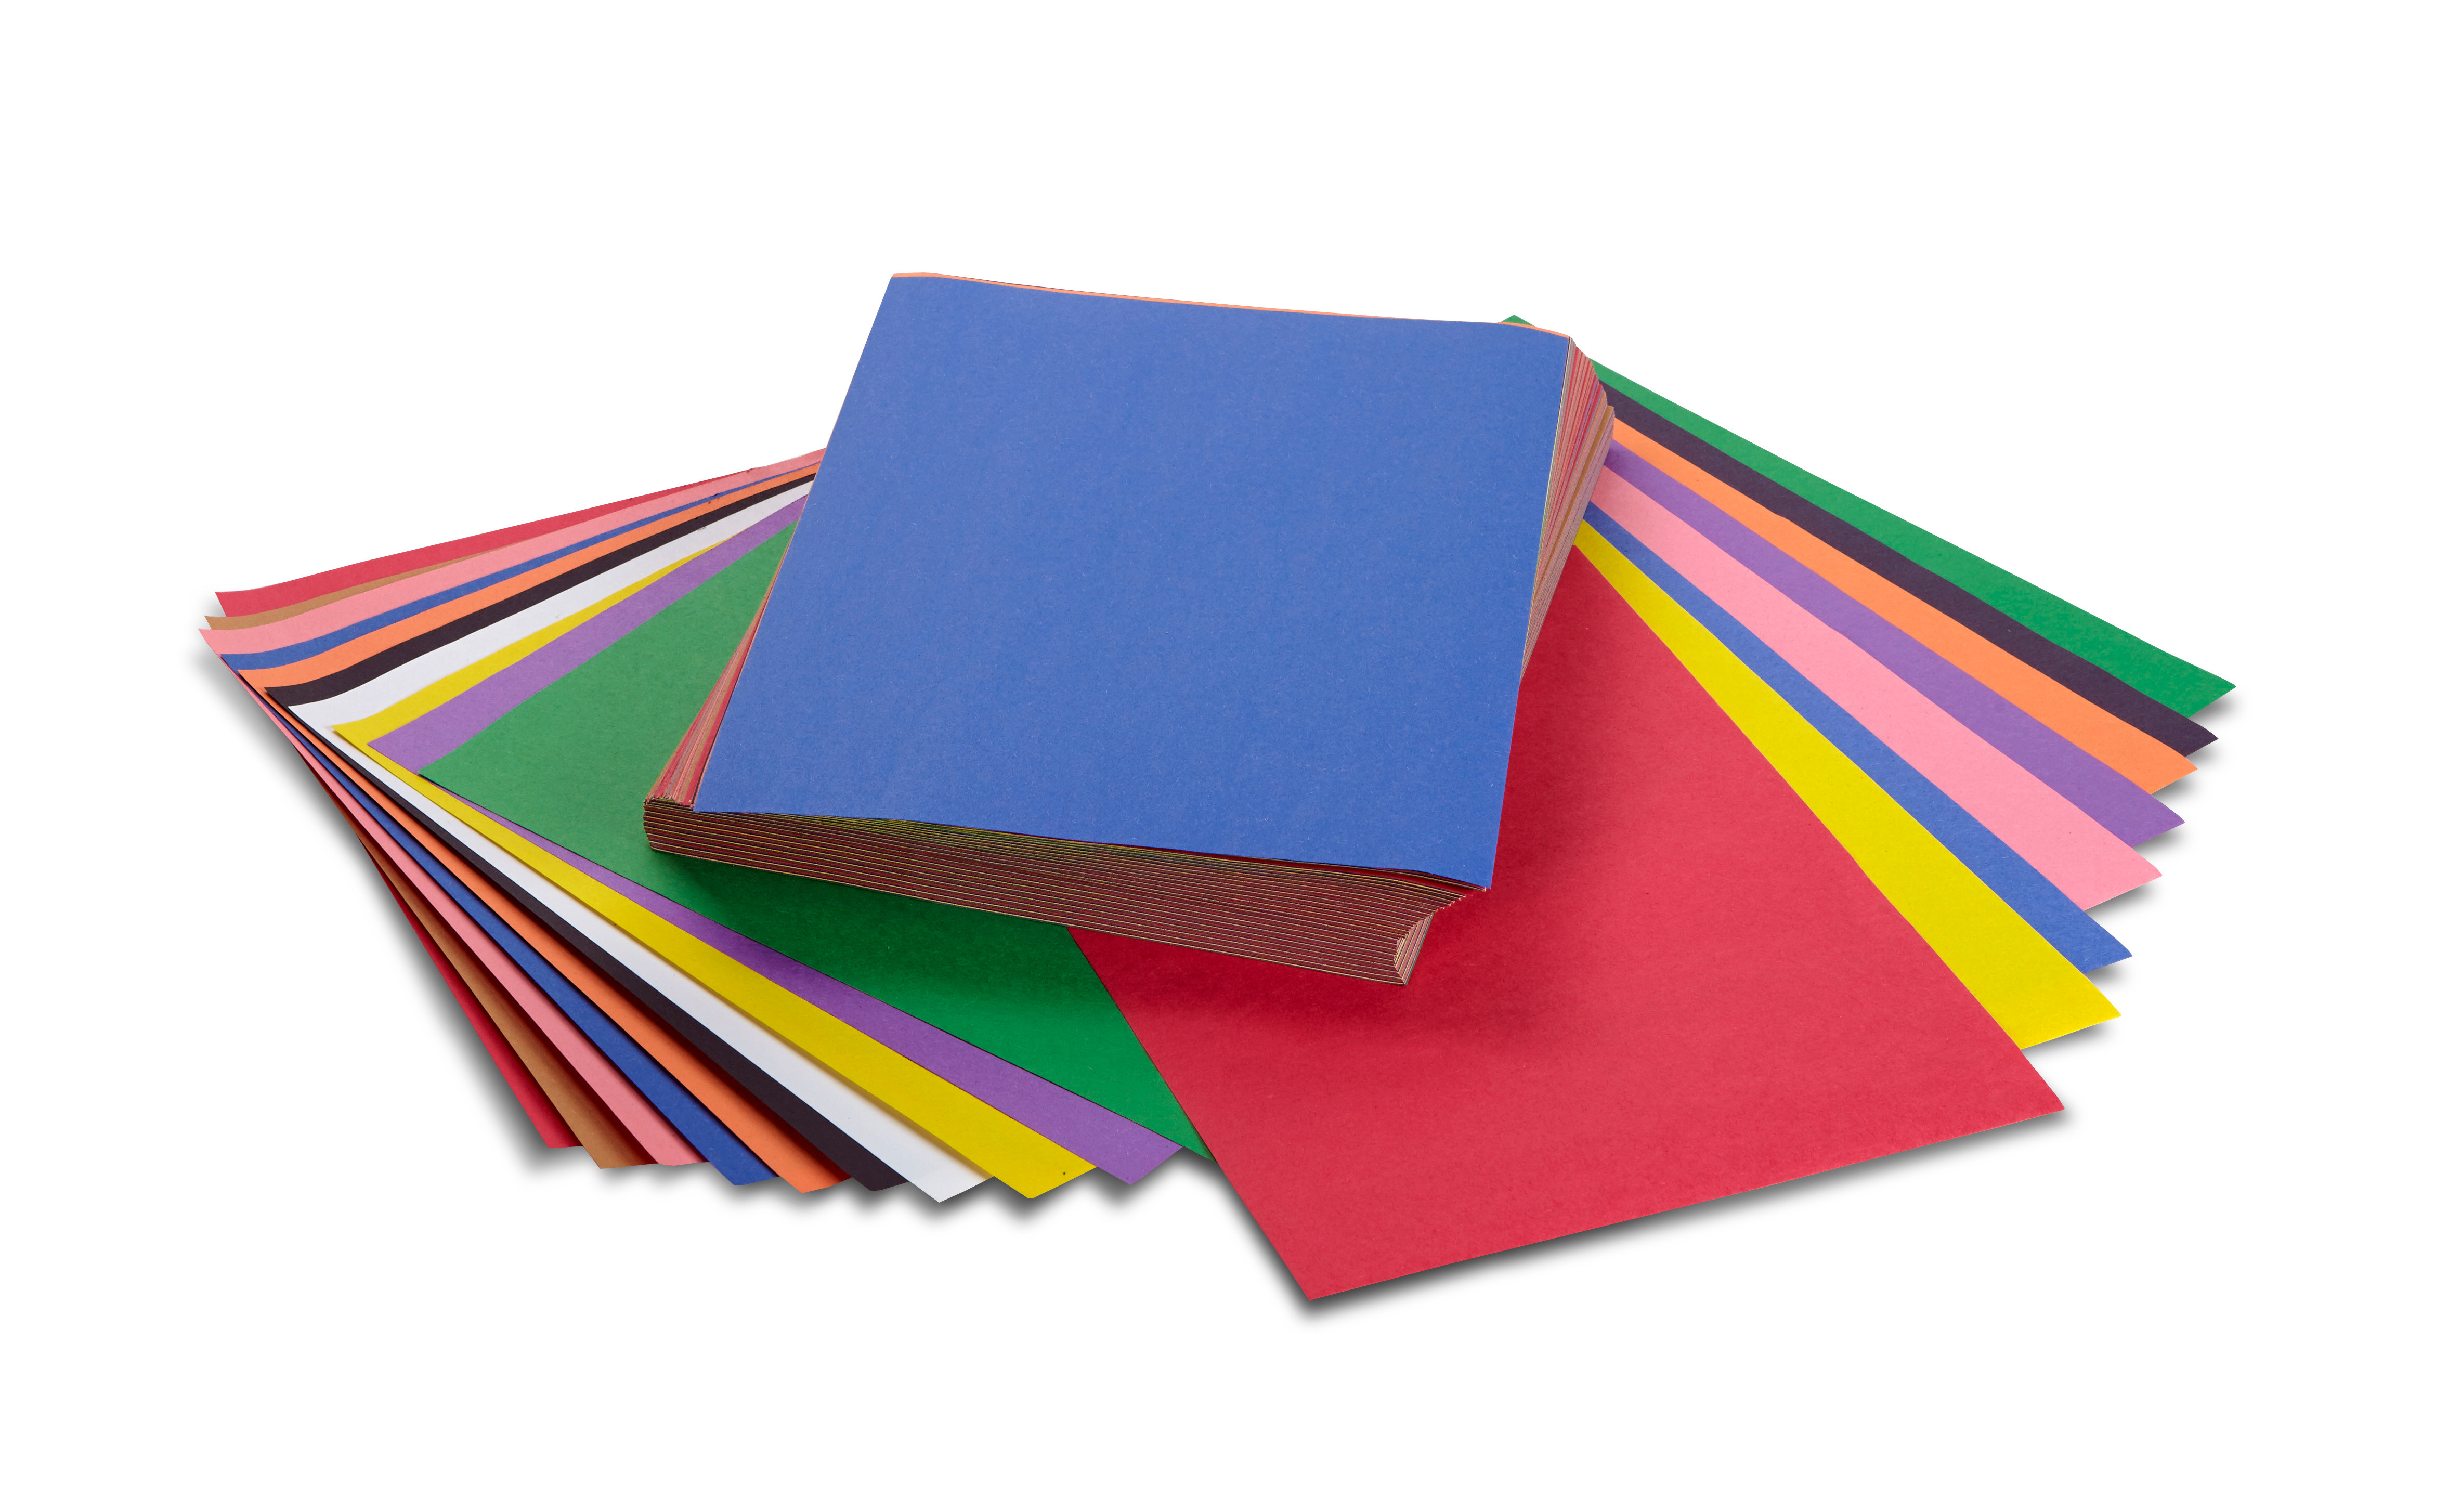 Crayola Construction Colored Paper in 10 Colors, School Supplies for Kindergarten, 120 Pcs, Child - image 4 of 11